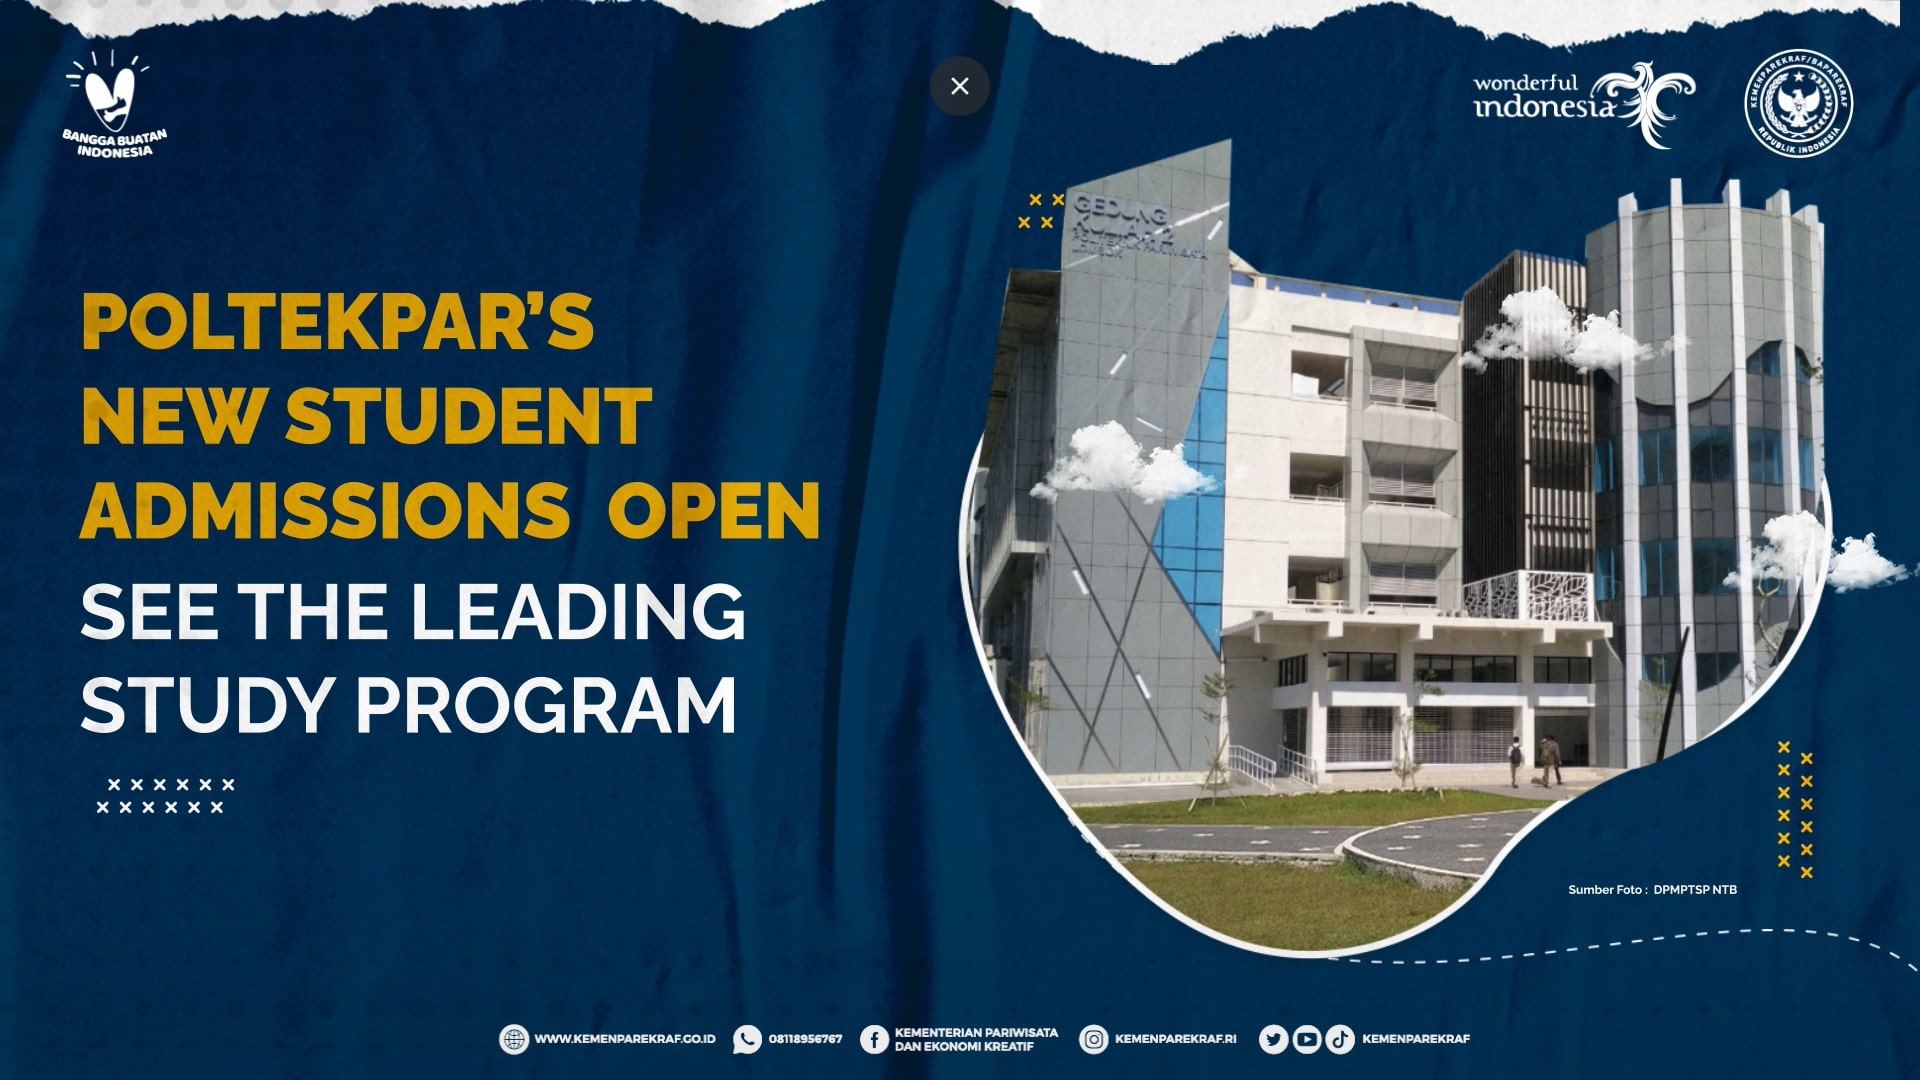 POLTEKPAR’S NEW STUDENT ADMISSIONS OPENED, SEE THE LEADING STUDY PROGRAM